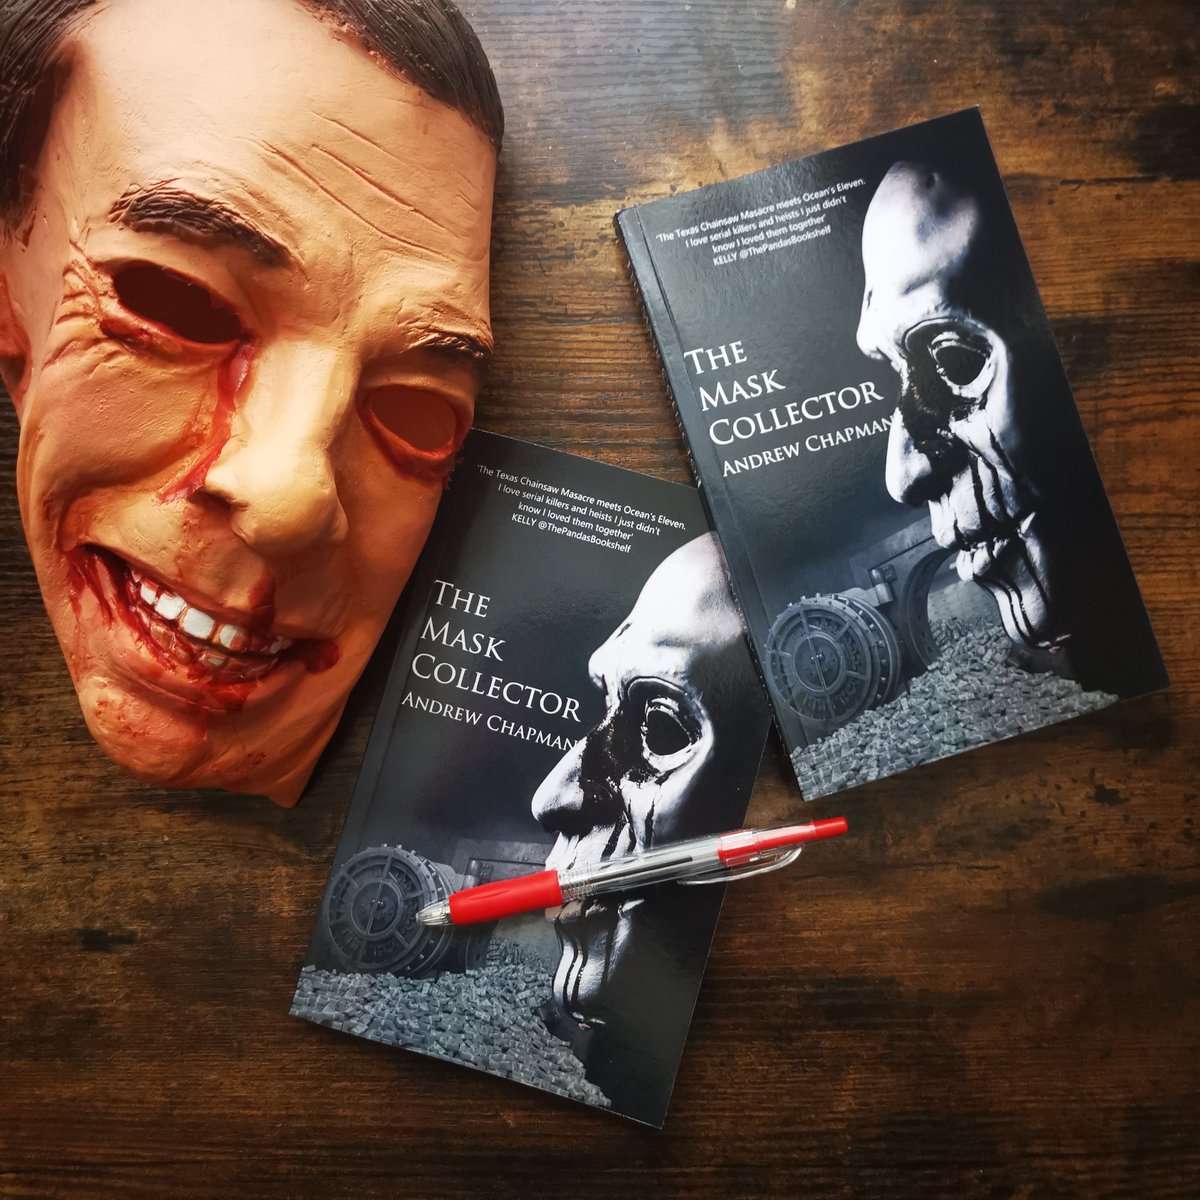 Signed some books today for competition winners!

(It was in a Books of Horror group on Facebook but if you feel you missed out... watch the space).

#booktwt #booksigning #BookGiveaway #Horror #HorrorBook #HorrorFan #horrornovel #horrorreads #HorrorCommunity